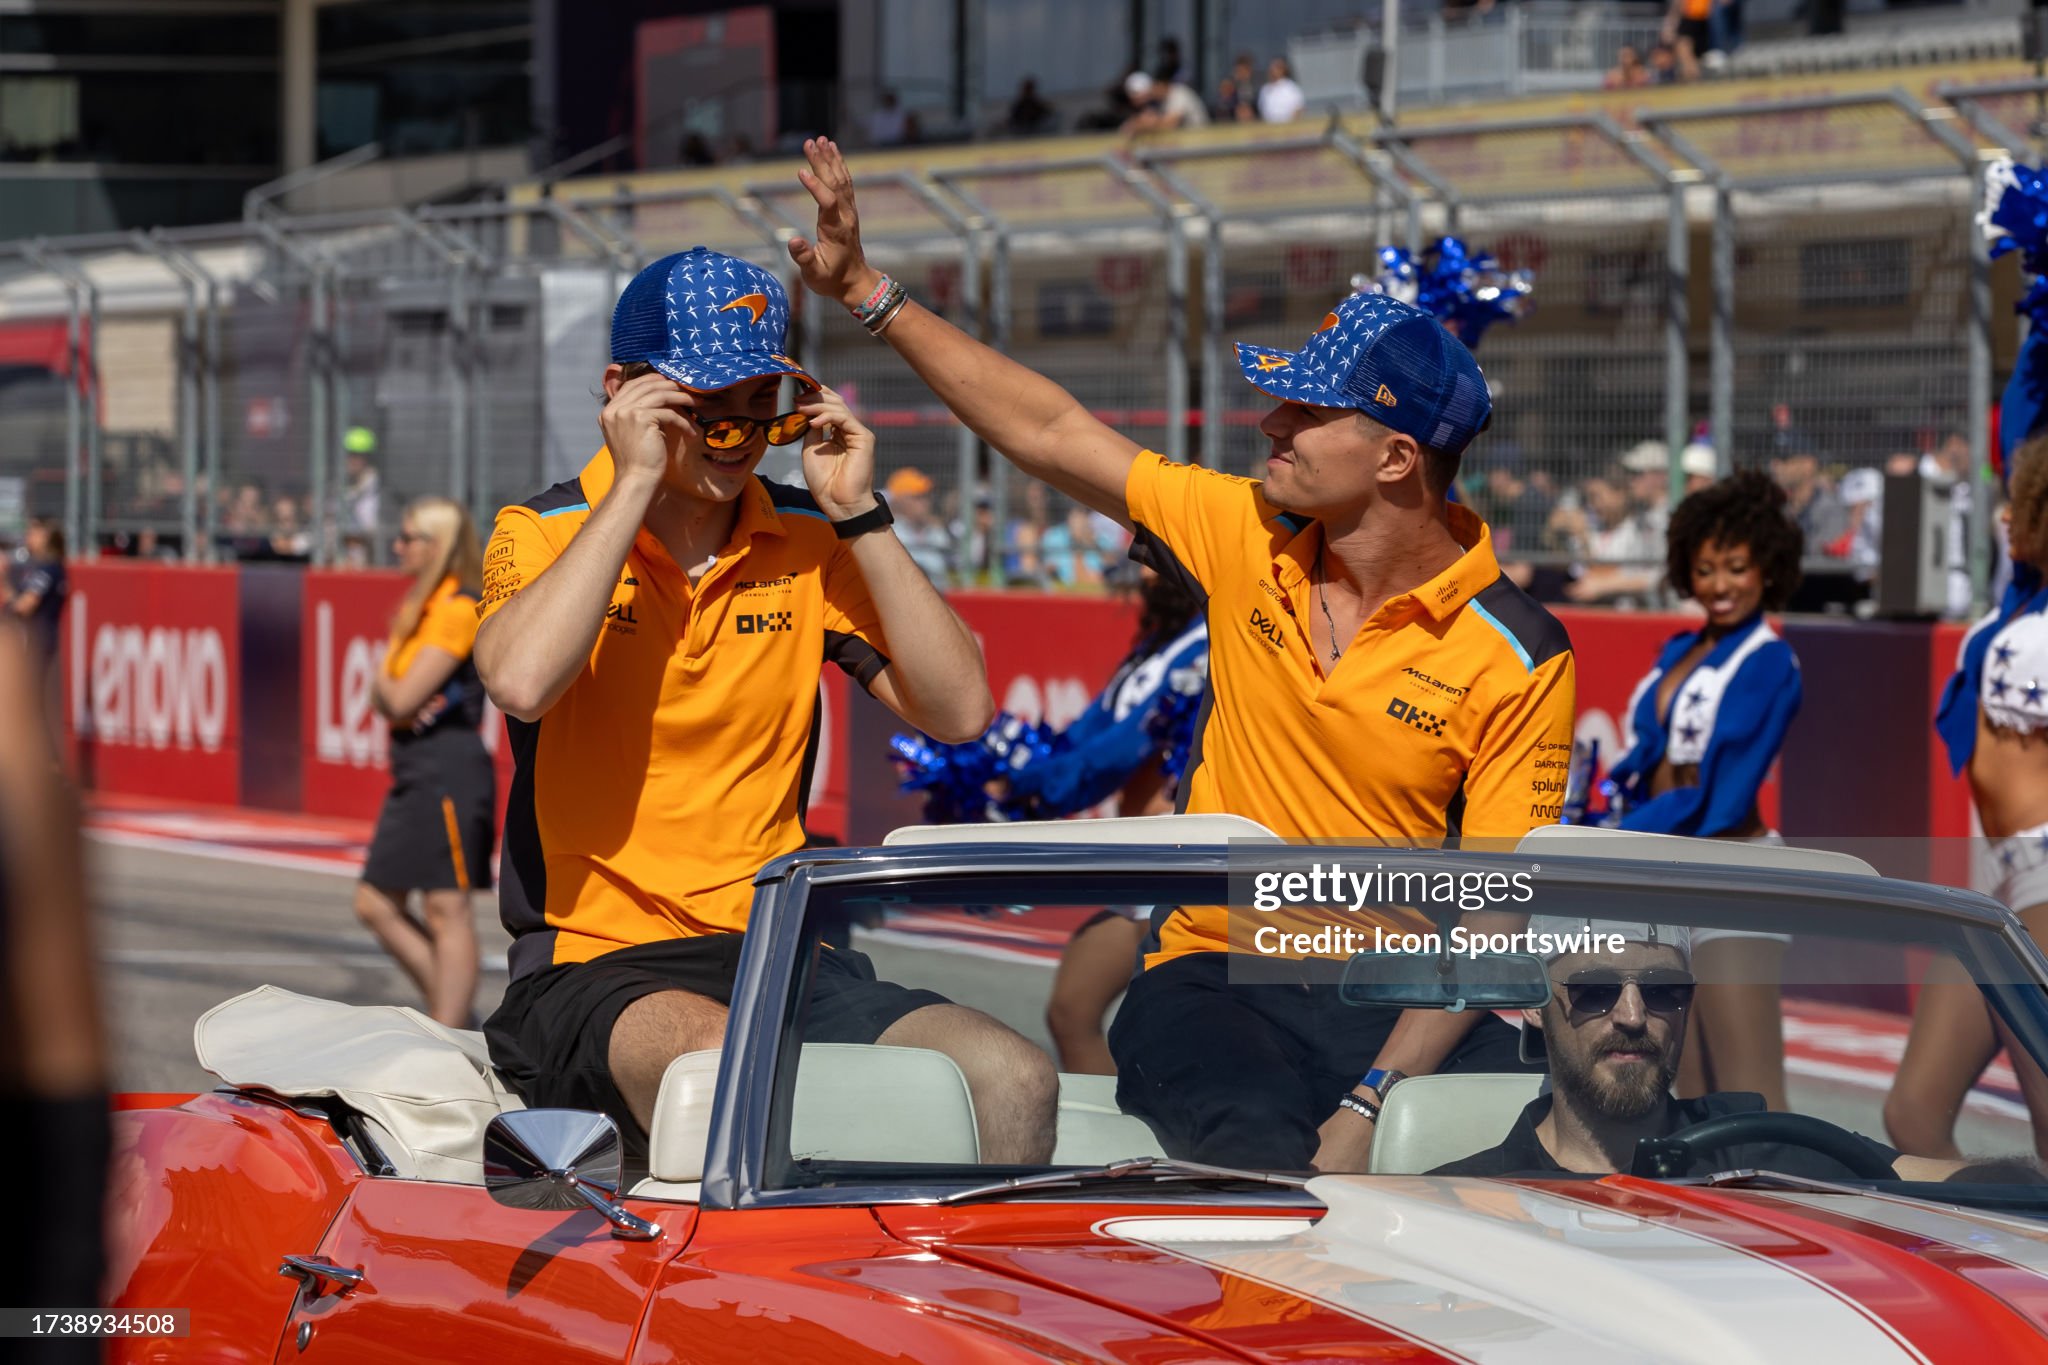 Two individuals wearing matching outfits and caps wave to a crowd from a convertible during a parade or event, discussing real estate chat.